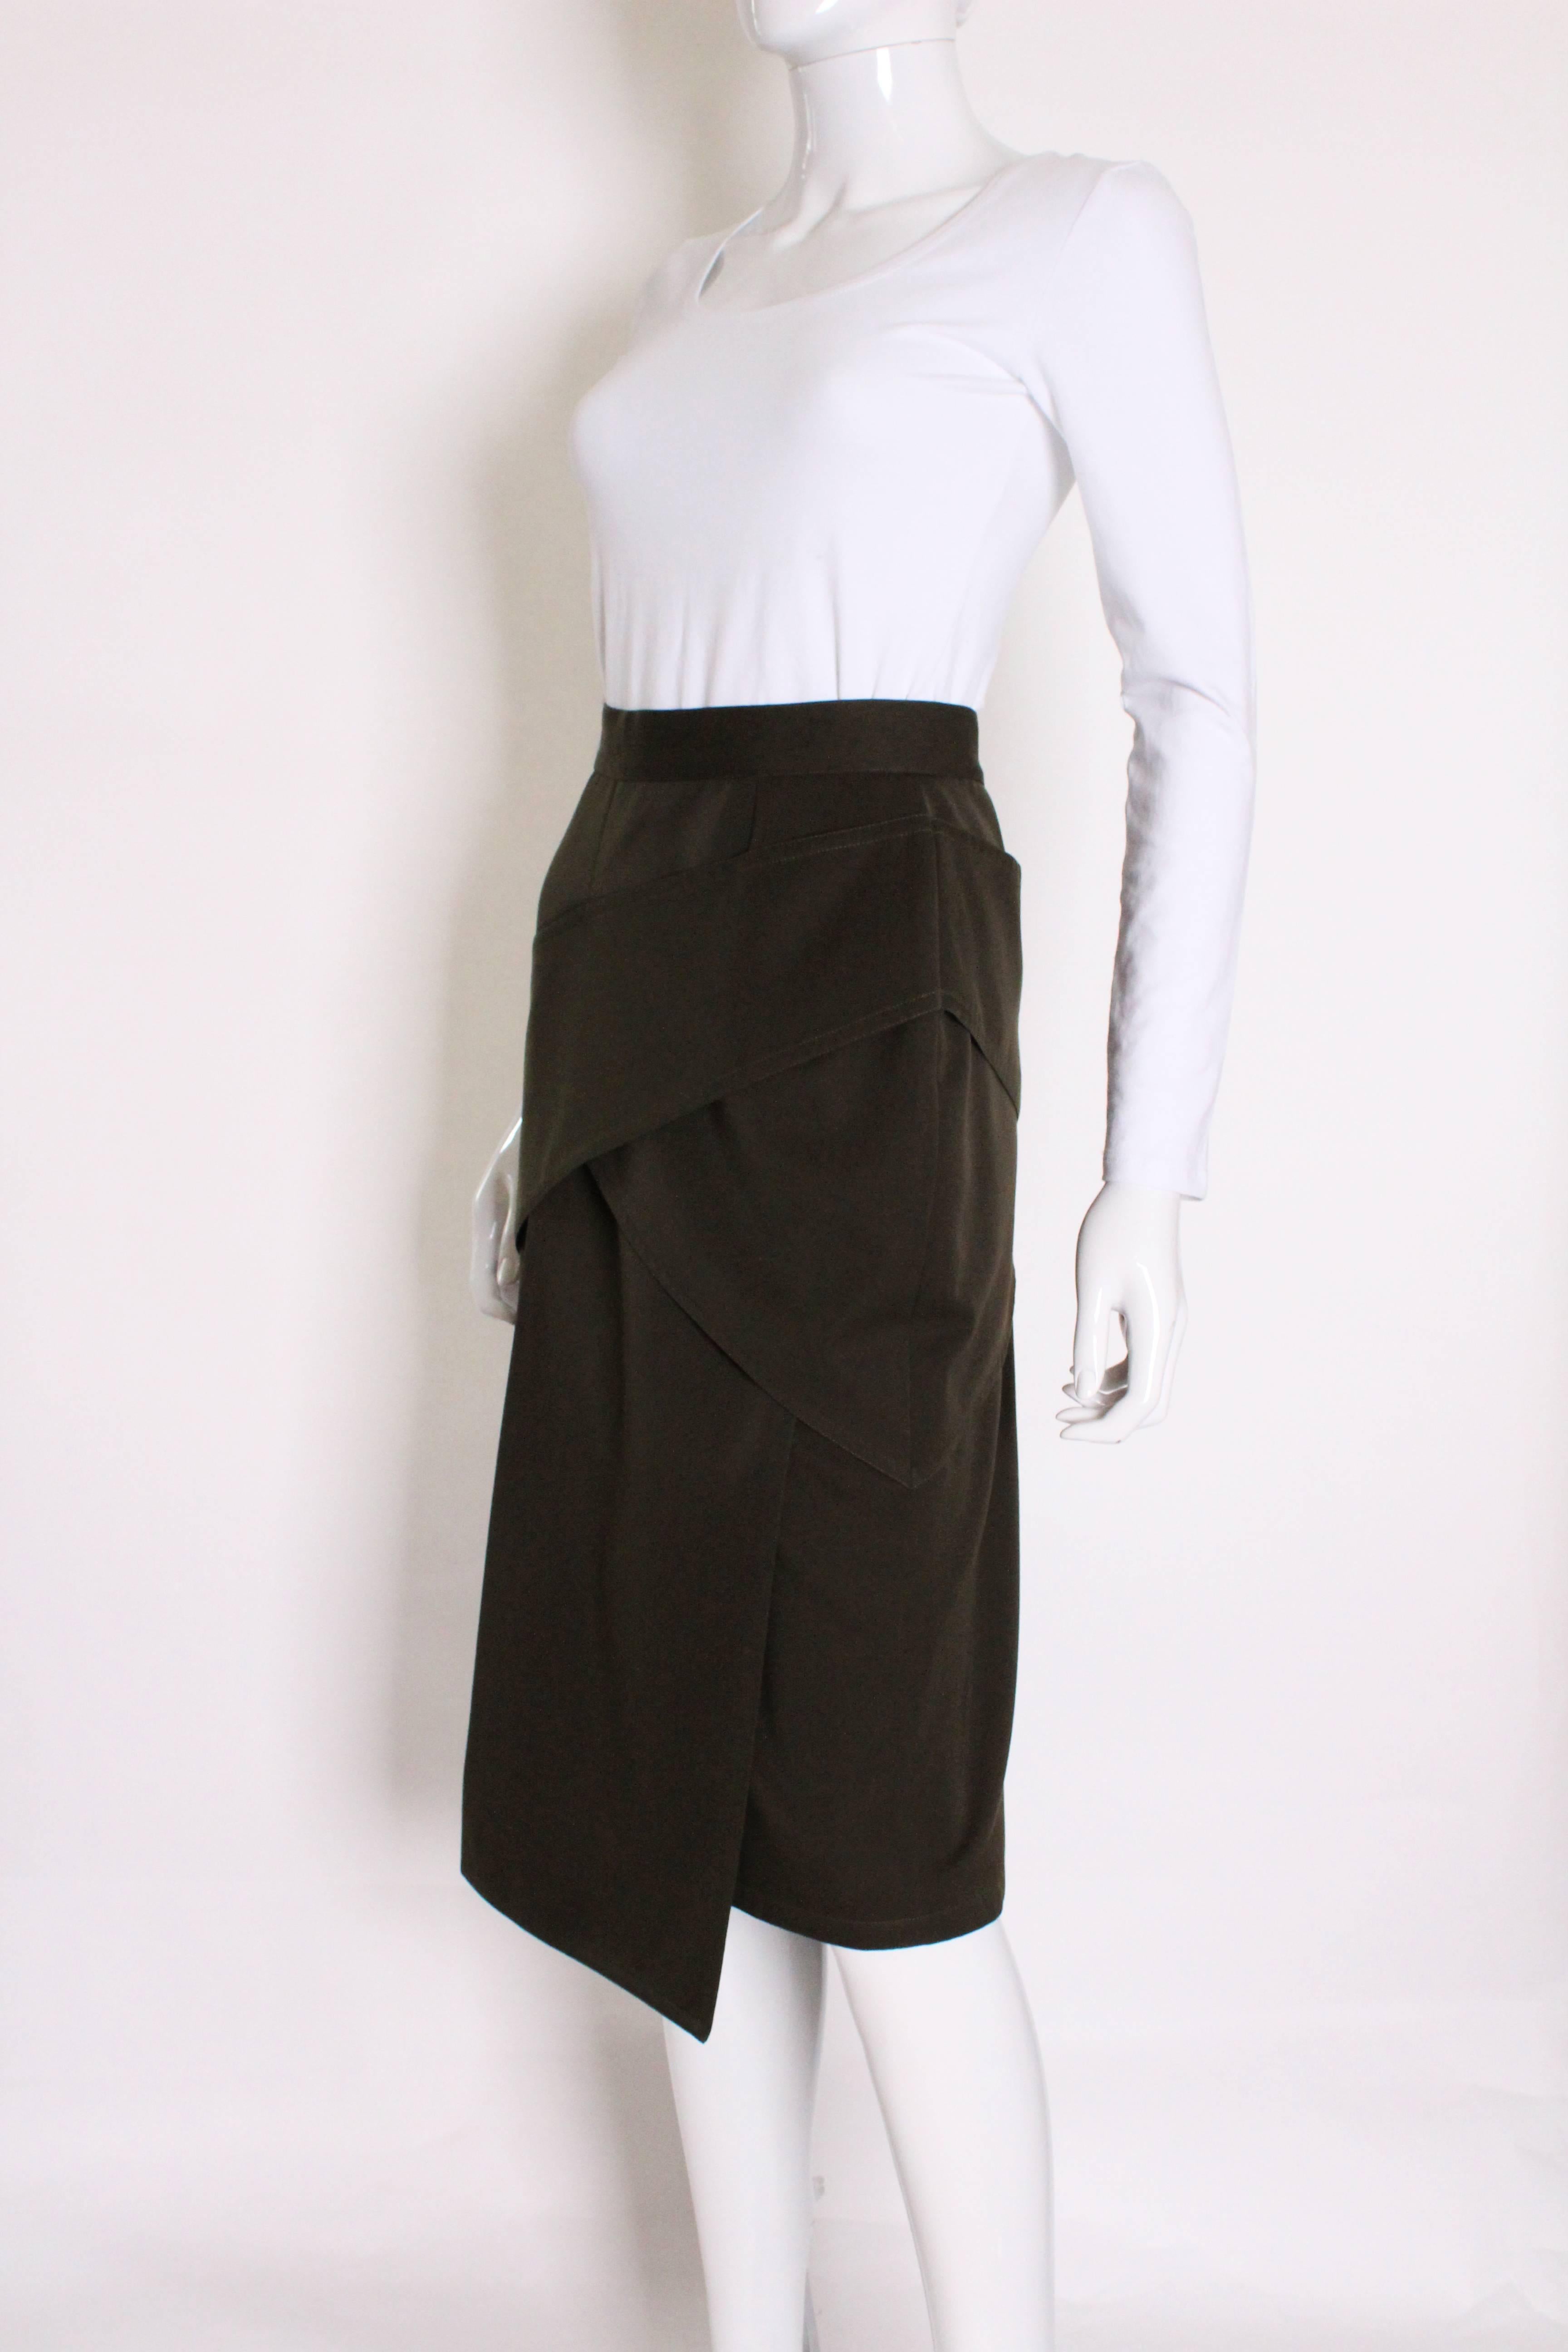 A great vintage skirt by Italian designer,Gianni Versace.
In a great sludge/khaki green colour,this skirt has a side zip,  and interesting draped layers on the front and back.
The skirt is 100 % wool, and Italian size 46.